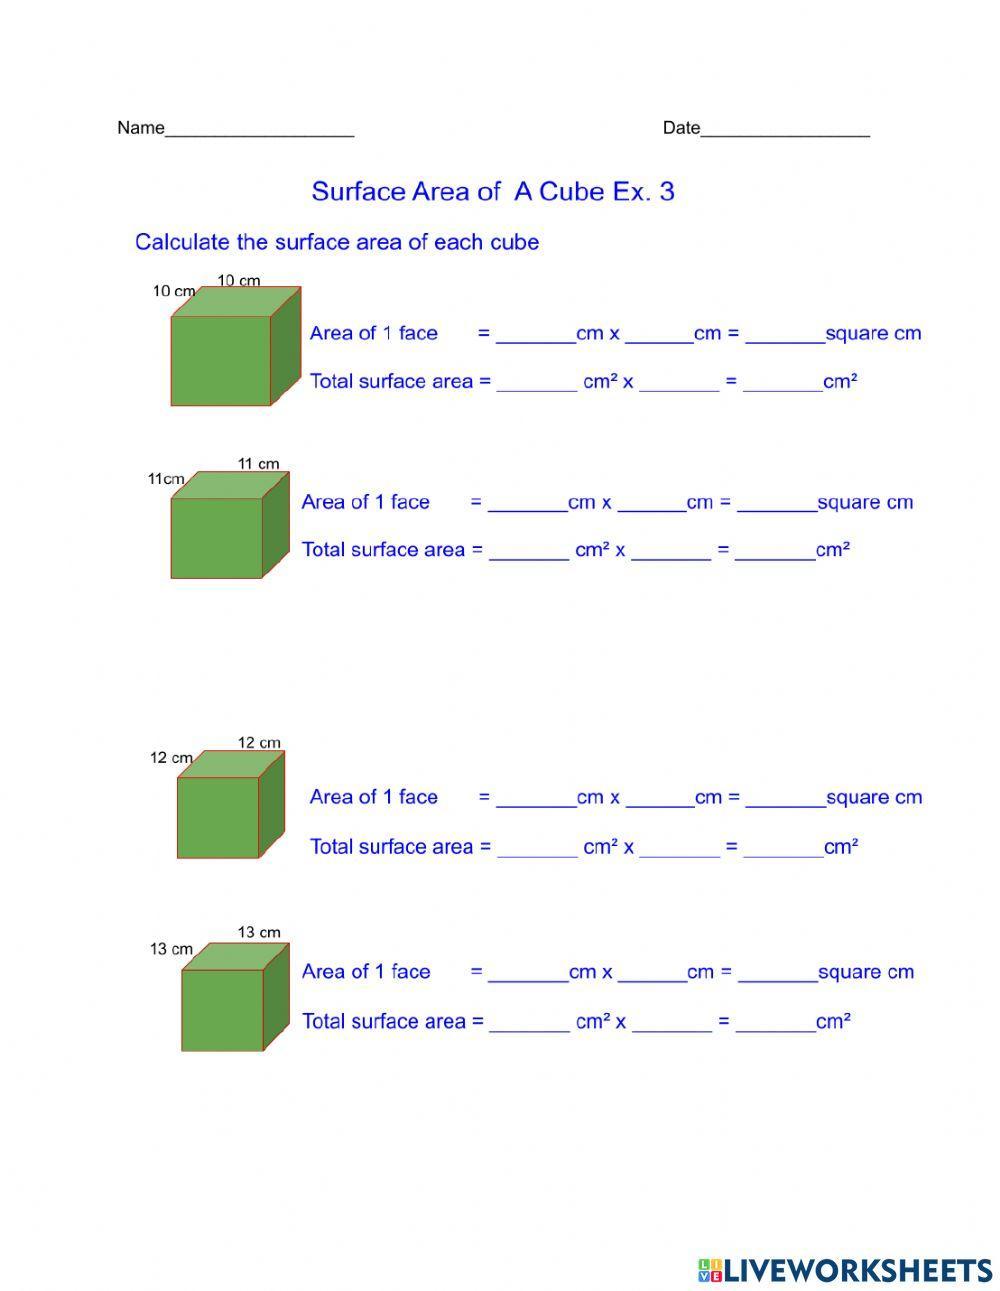 Surface Area of a Cube Ex.3